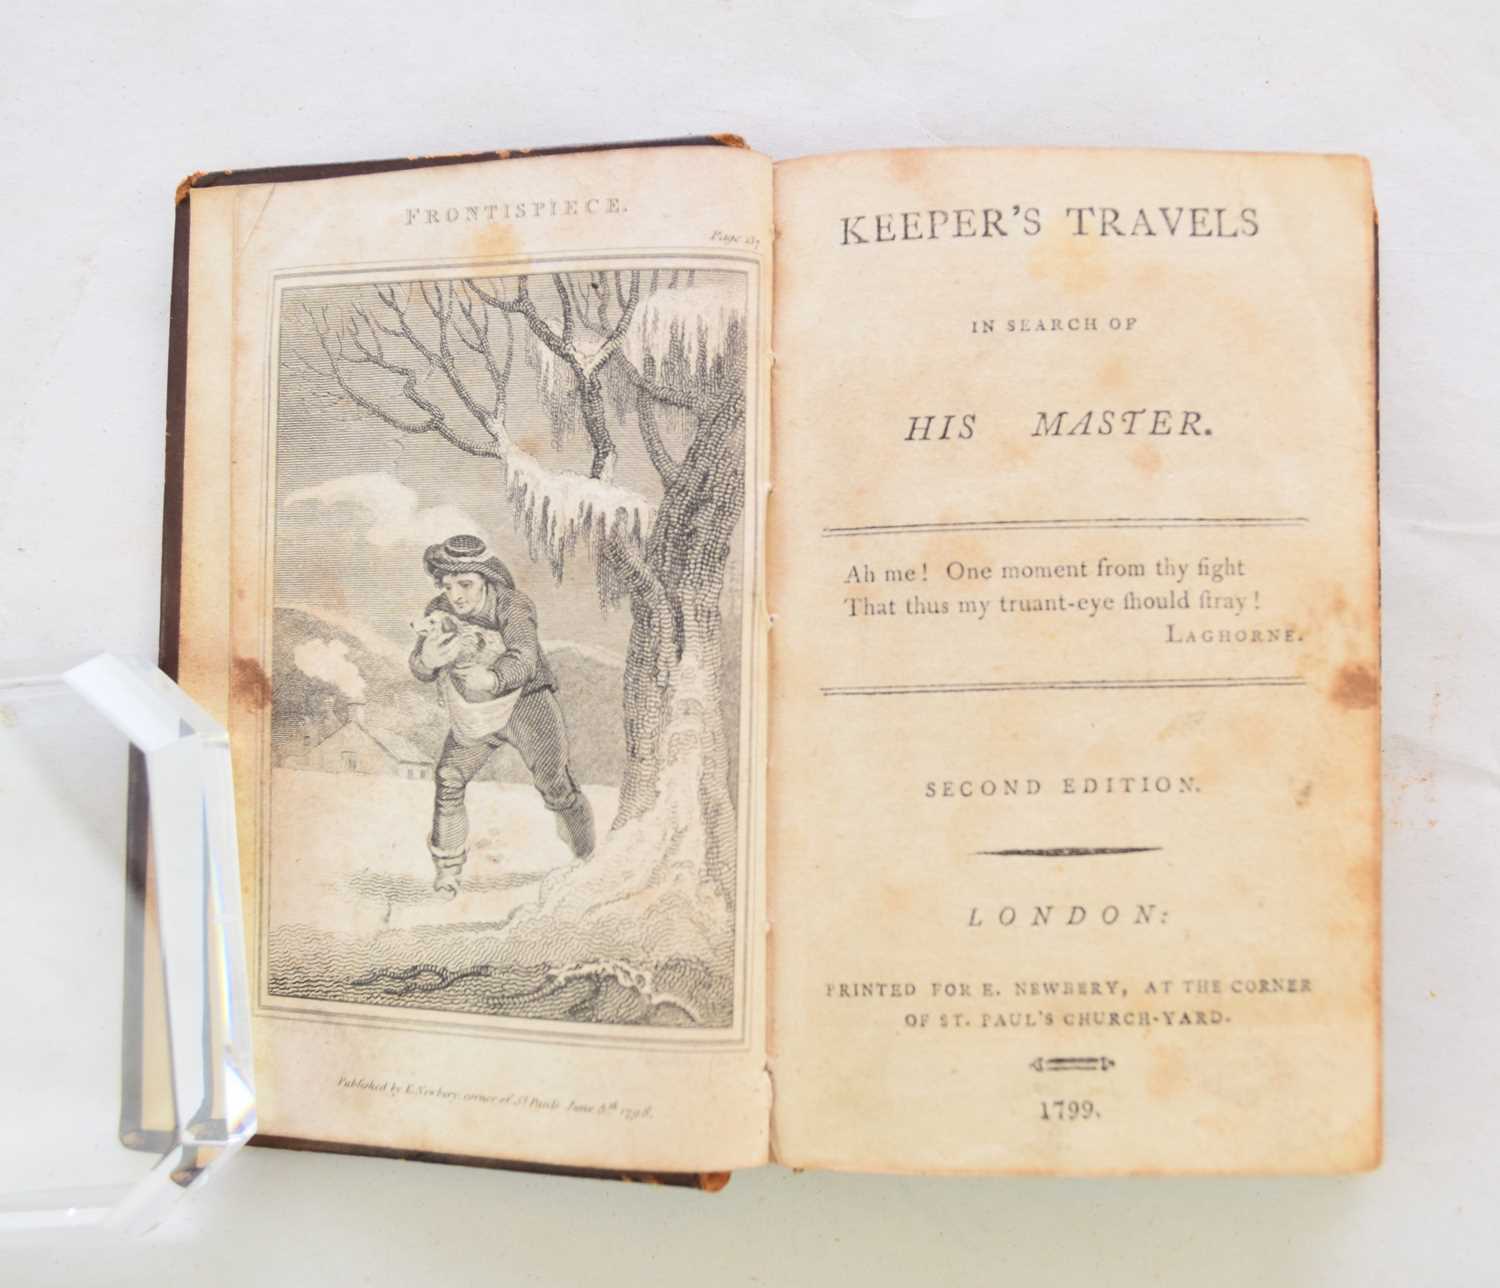 Lot 1021 - KENDALL, Edward Augustus, Keeper's Travels in Search of His Master.